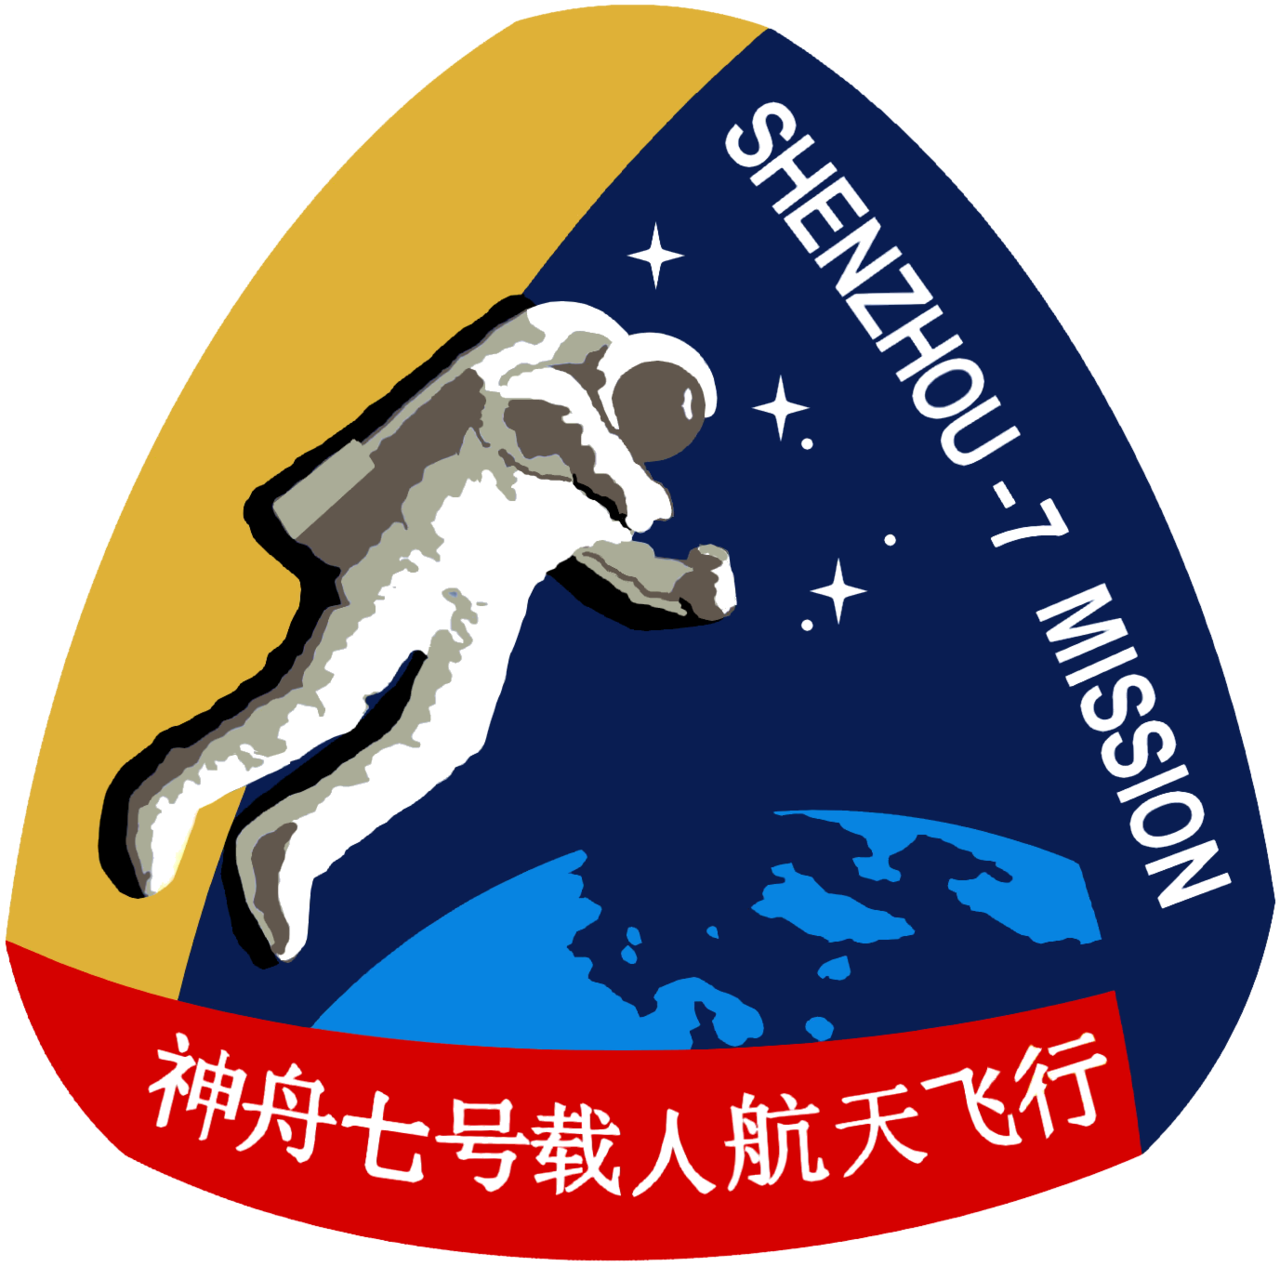 Mission patch for Shenzhou-7